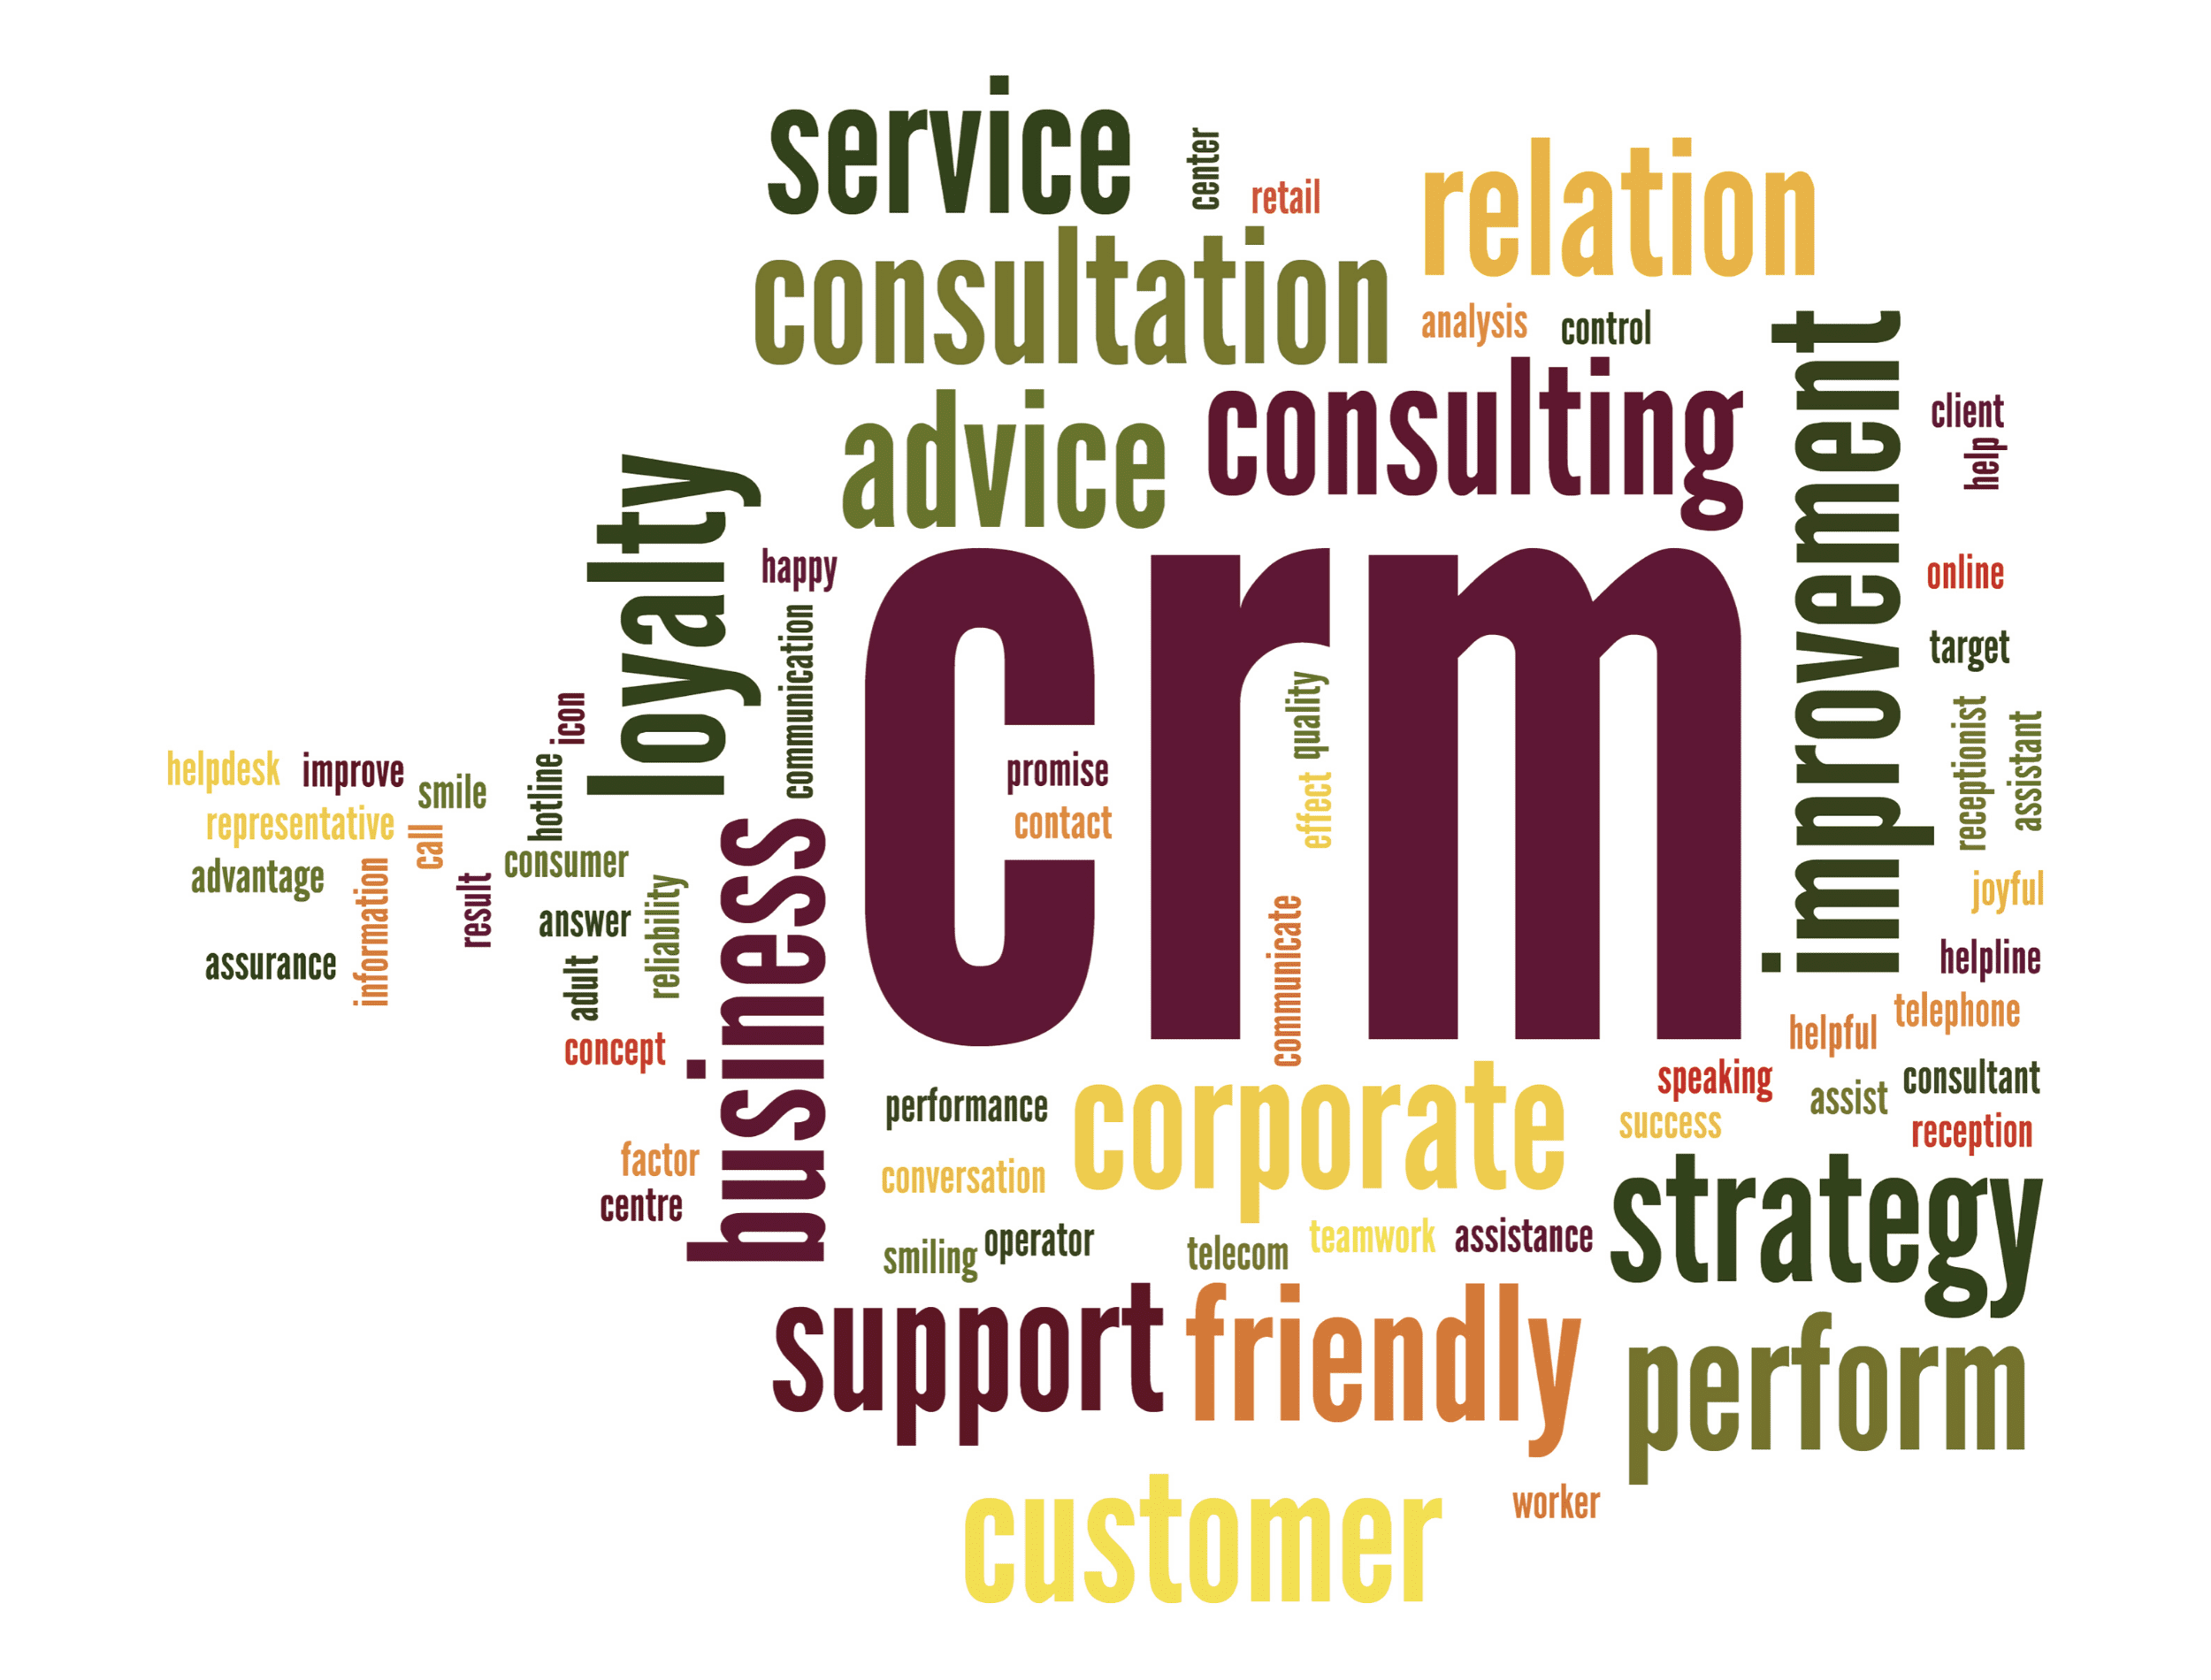 What does CRM mean?